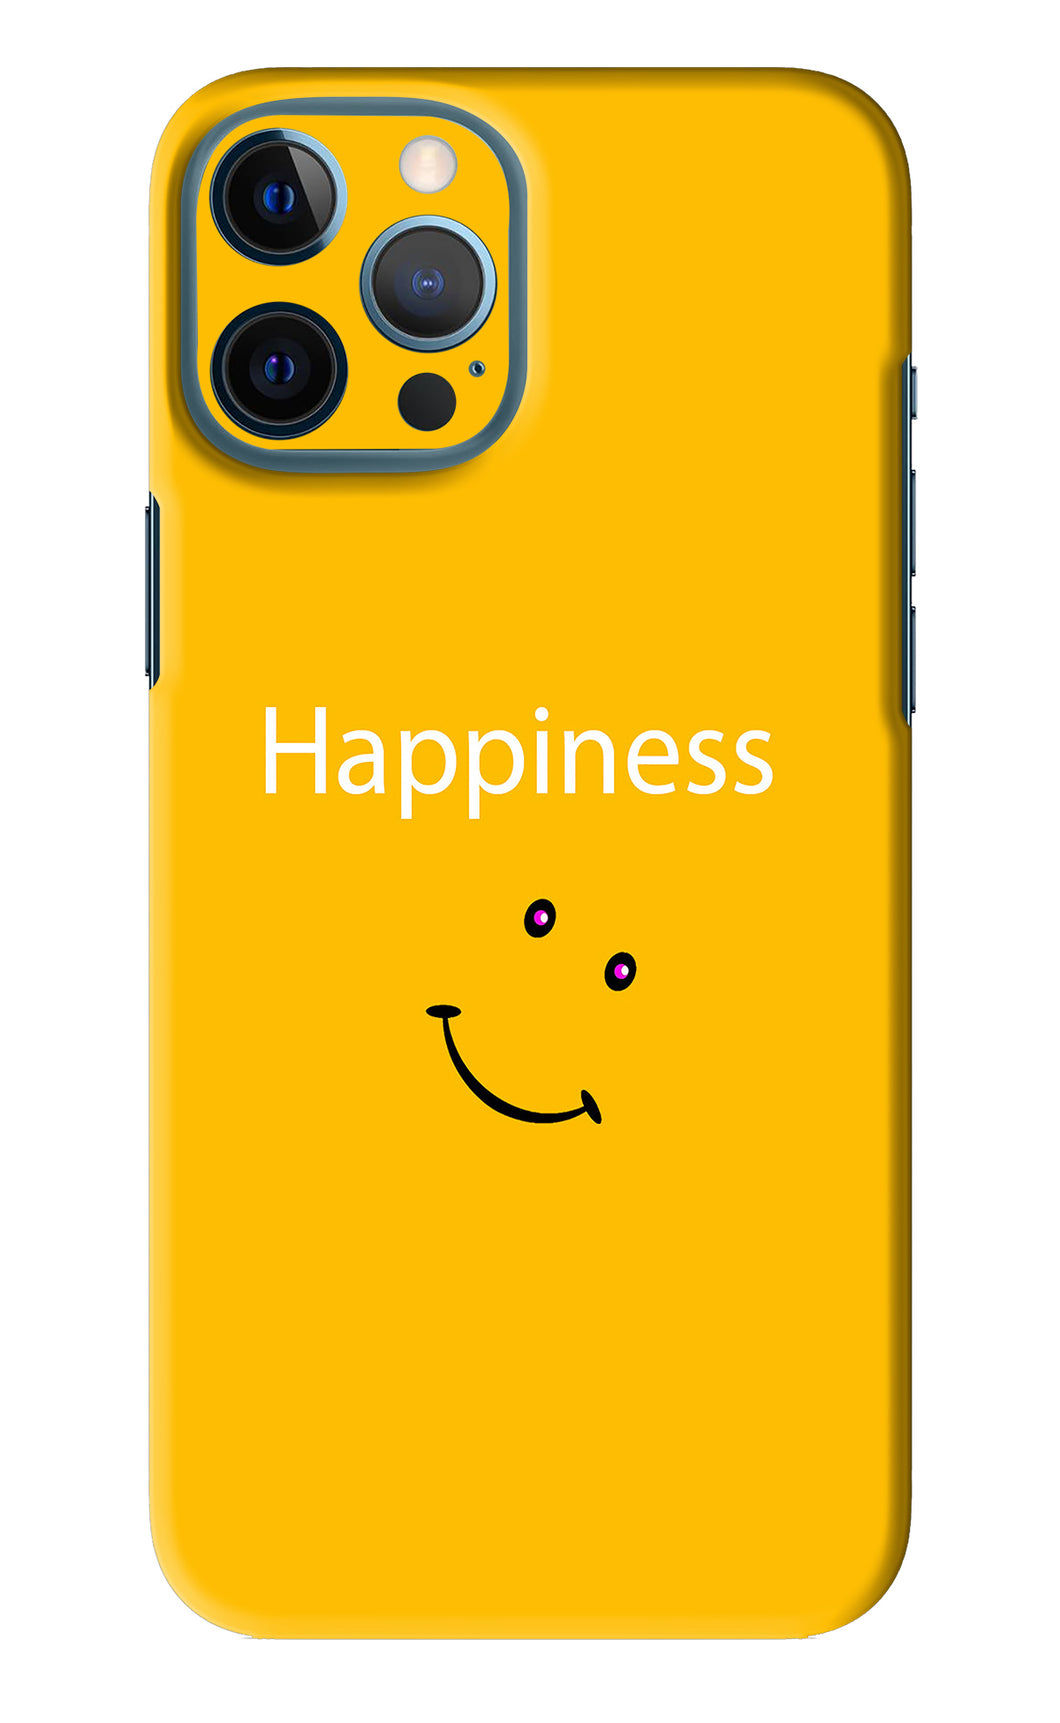 Happiness With Smiley iPhone 12 Pro Max Back Skin Wrap